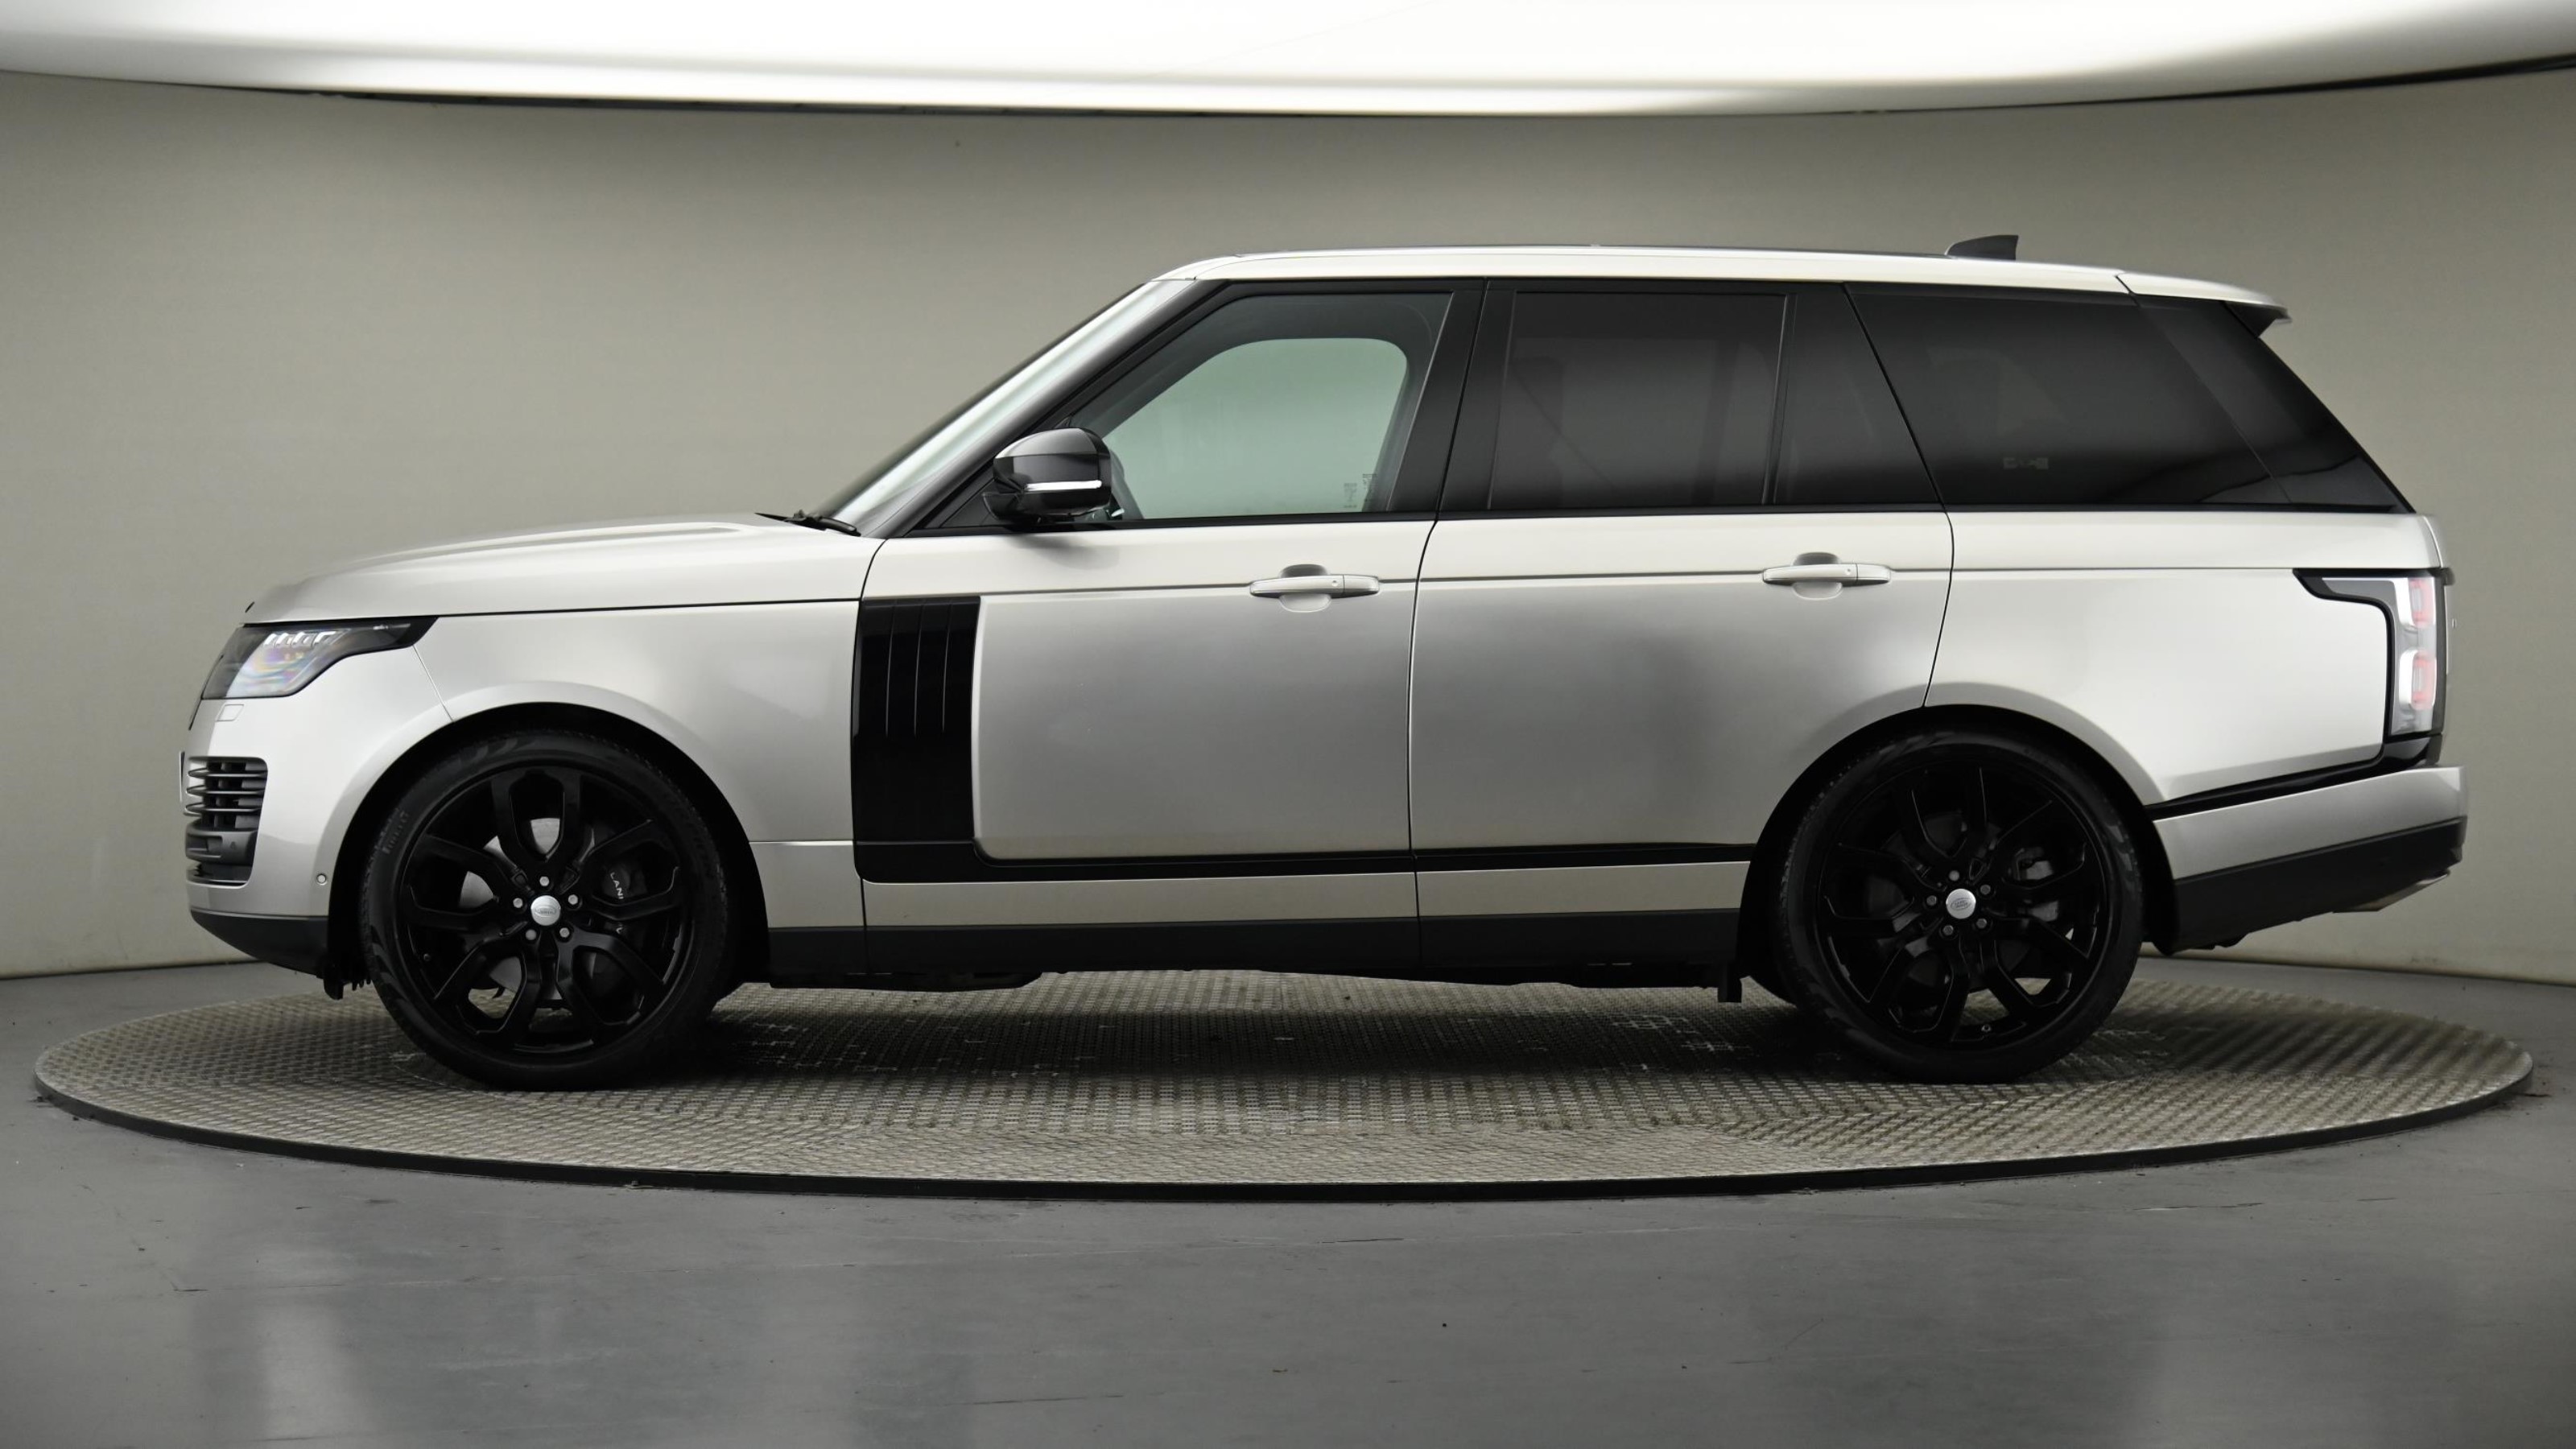 Used 2018 Land Rover Range Rover 44 Sdv8 Autobiography 4dr Auto £